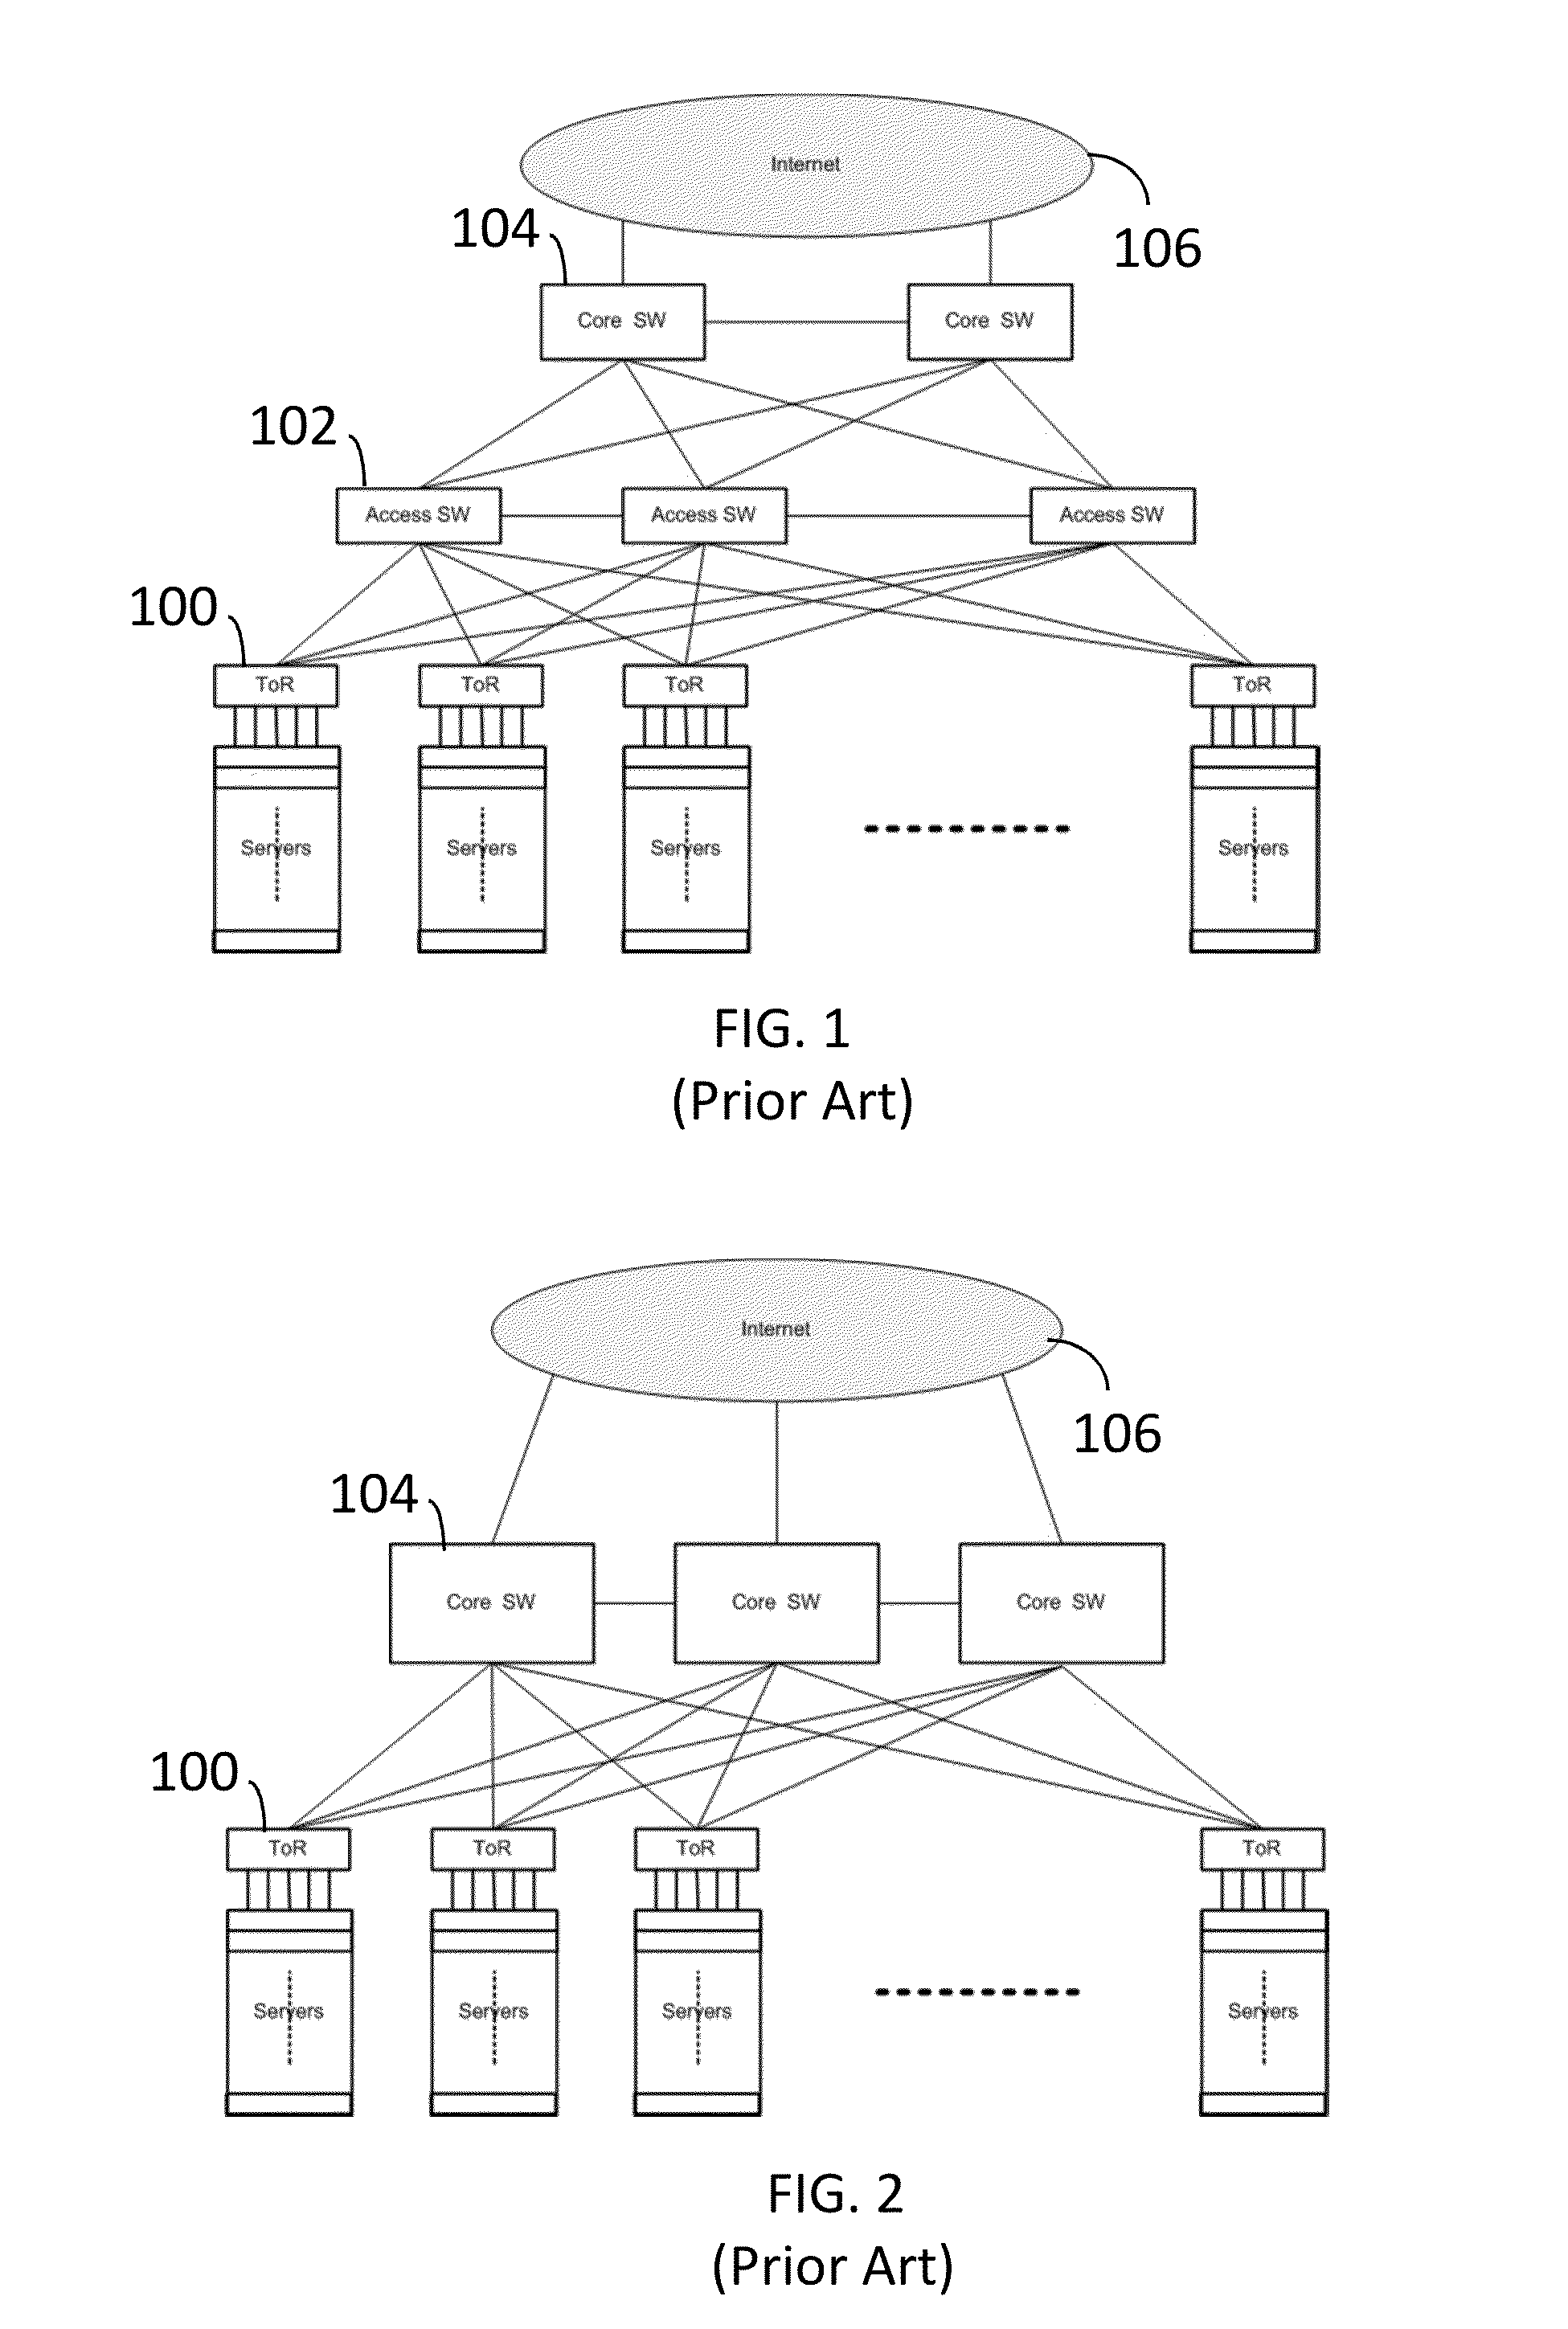 Distributed Optical Switching Architecture for Data Center Networking